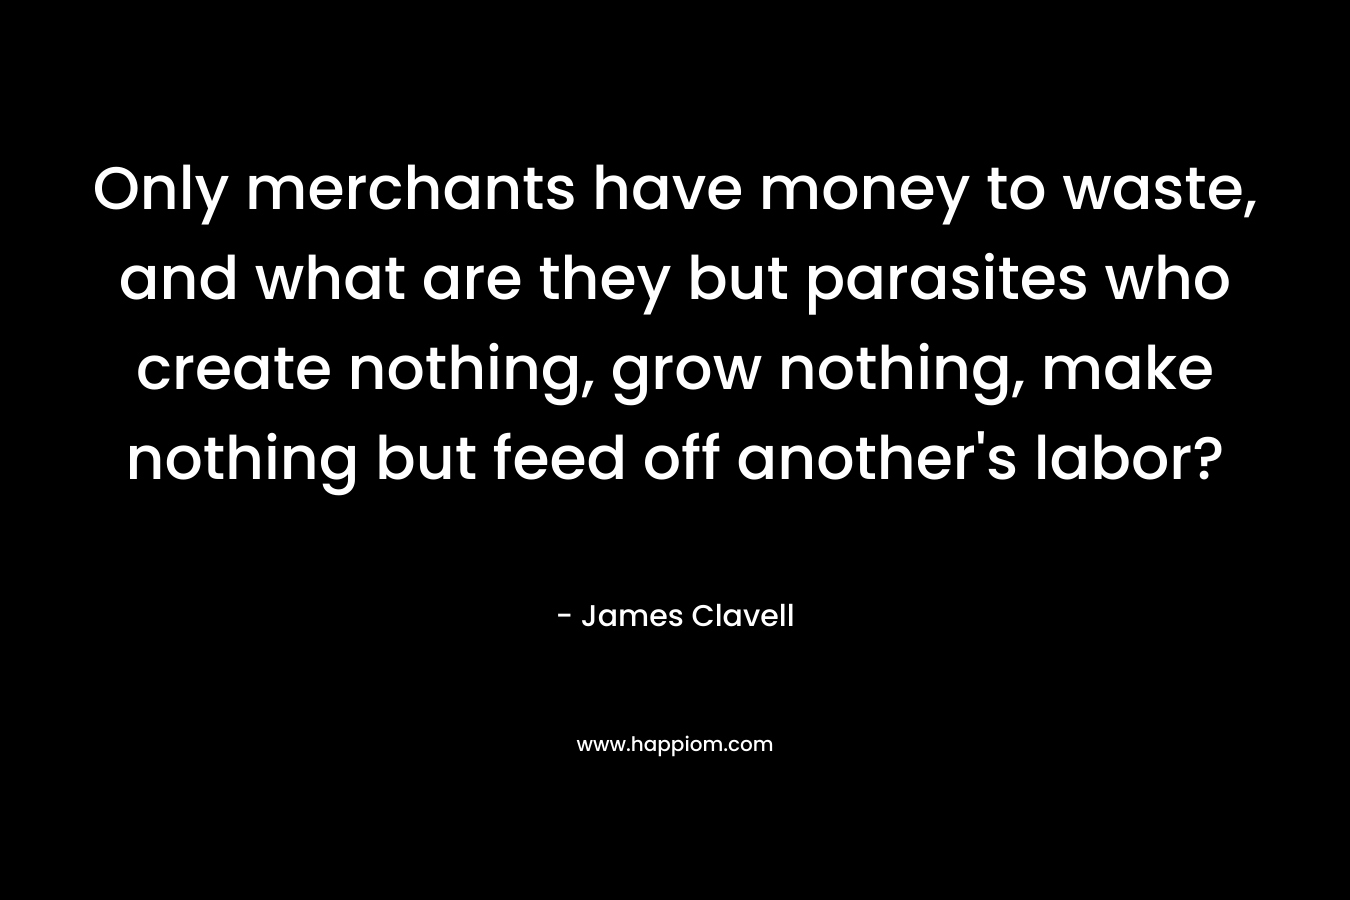 Only merchants have money to waste, and what are they but parasites who create nothing, grow nothing, make nothing but feed off another's labor?